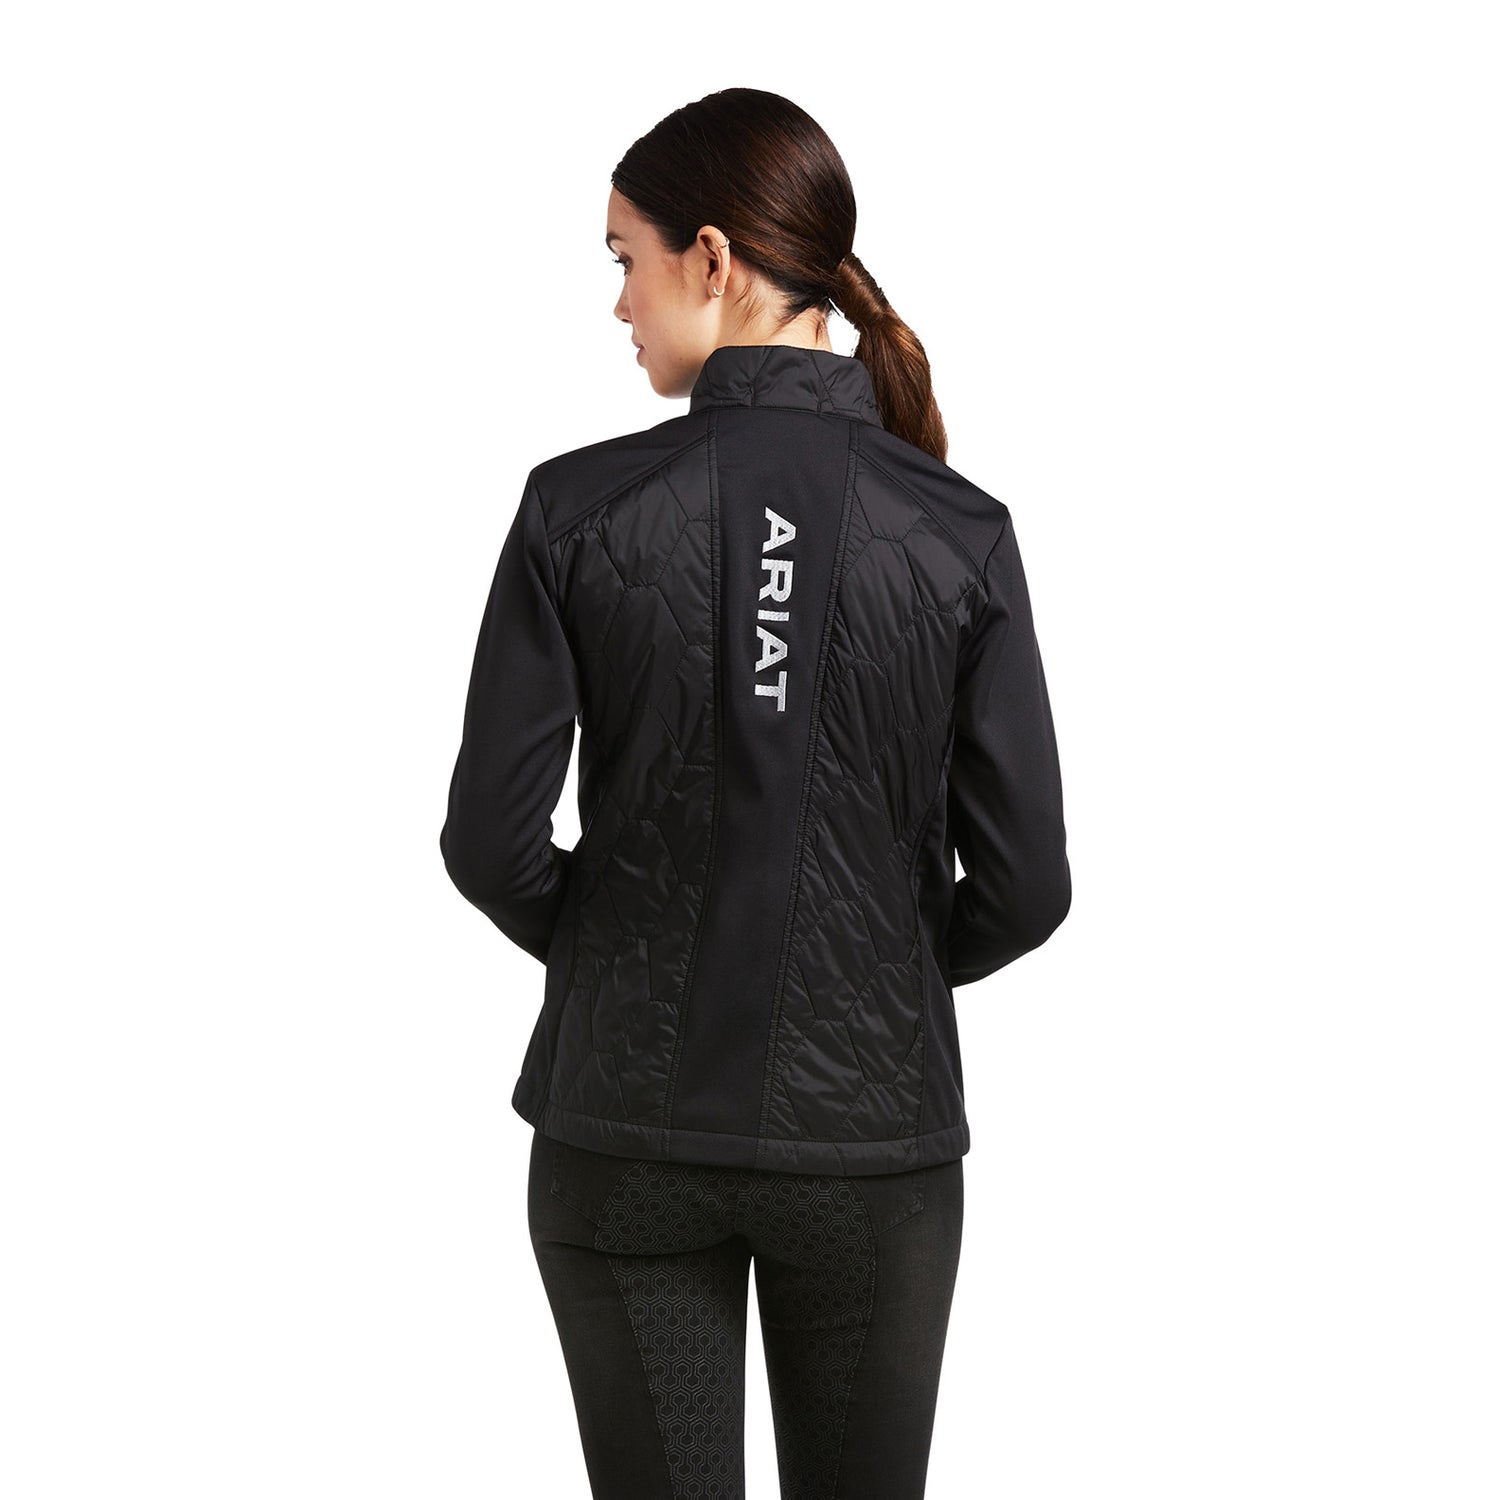 Ariat-Womens-Fusion-Insulated-Jacket